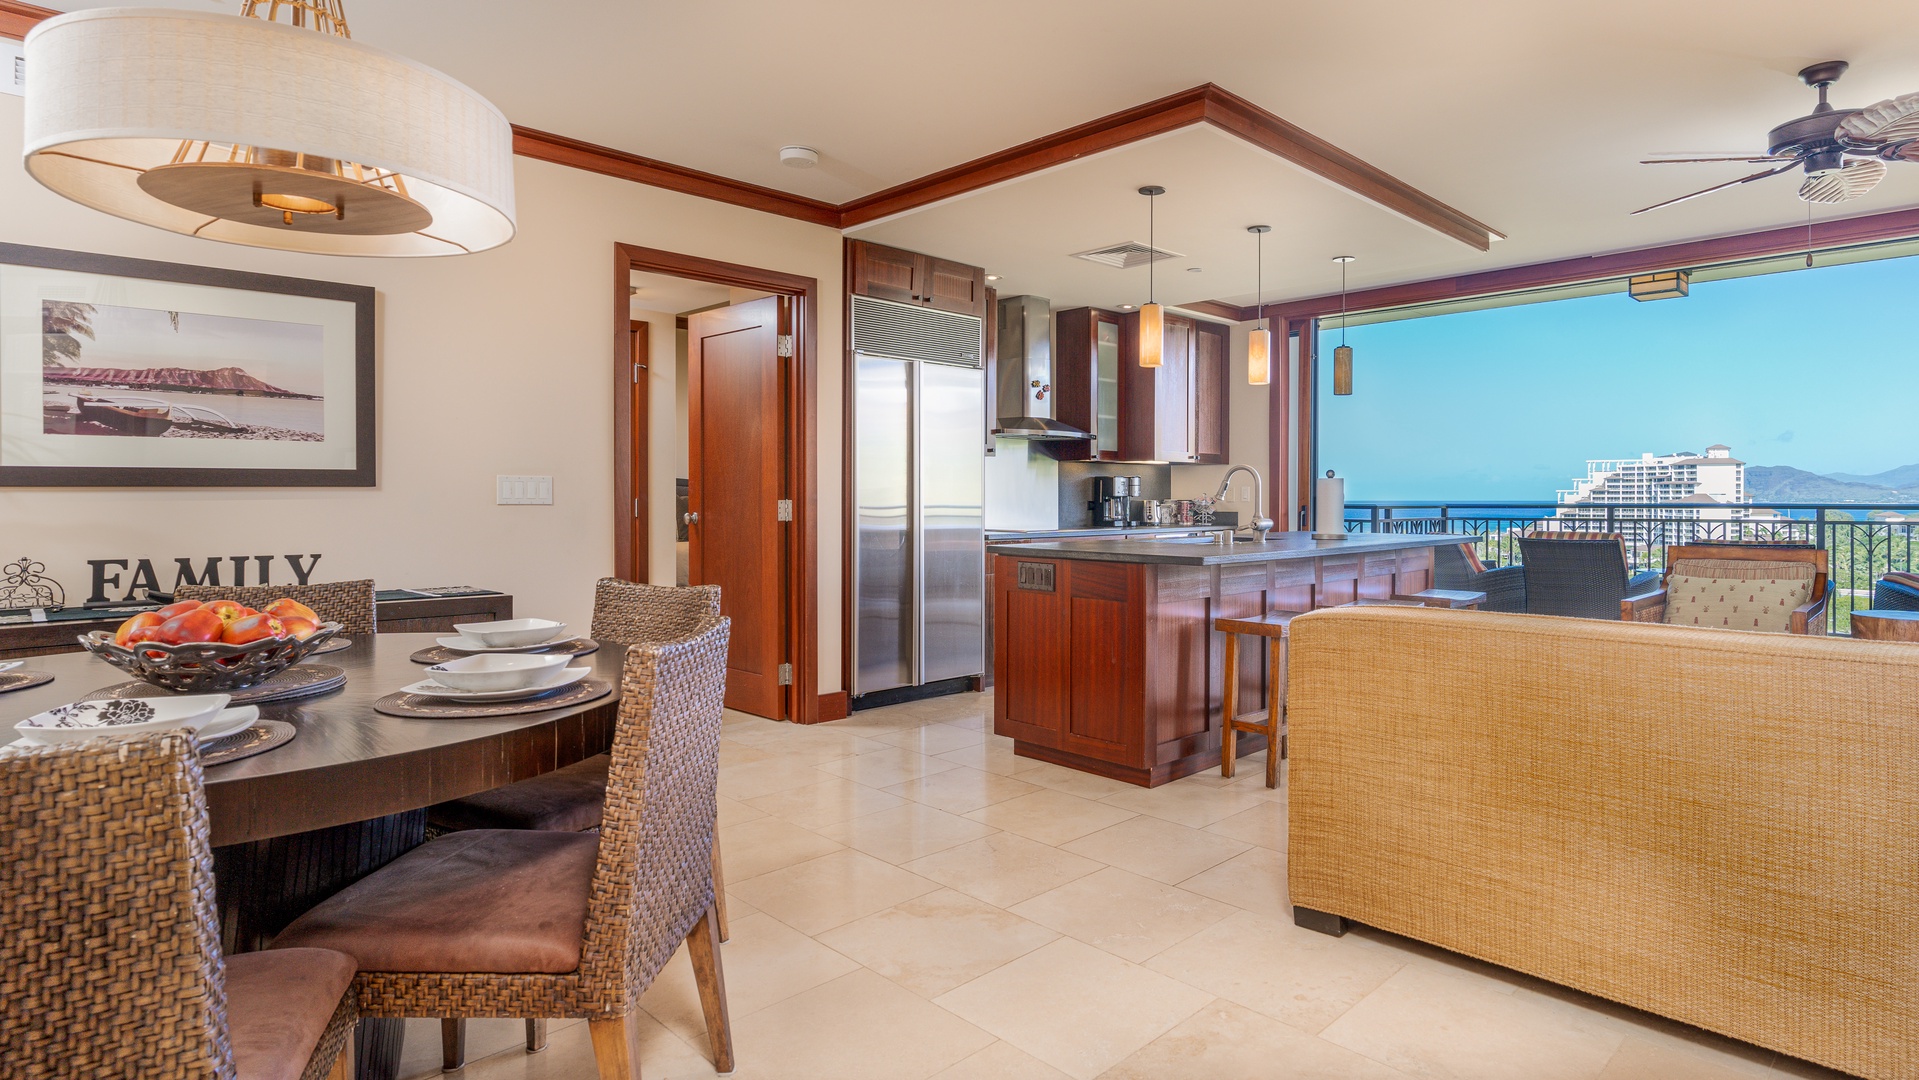 Kapolei Vacation Rentals, Ko Olina Beach Villas B1101 - A view of the open floor plan with kitchen, dining and living areas.